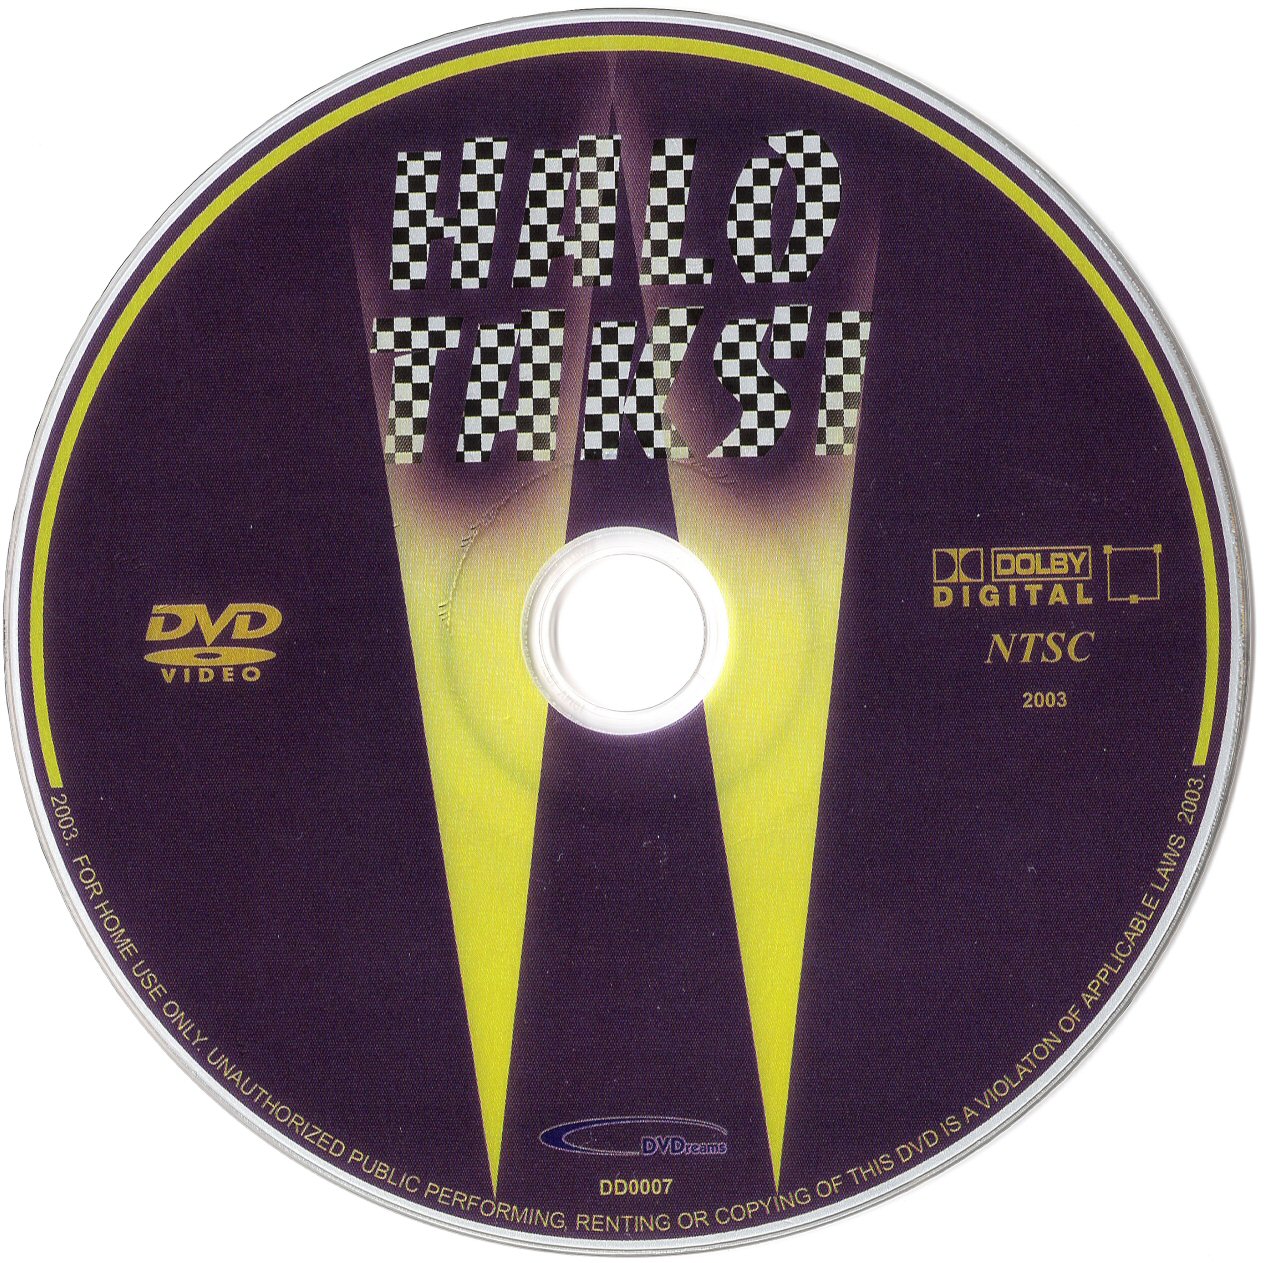 Click to view full size image -  DVD Cover - H - DVD - HALO TAXI - CD - DVD - HALO TAXI - CD.JPG